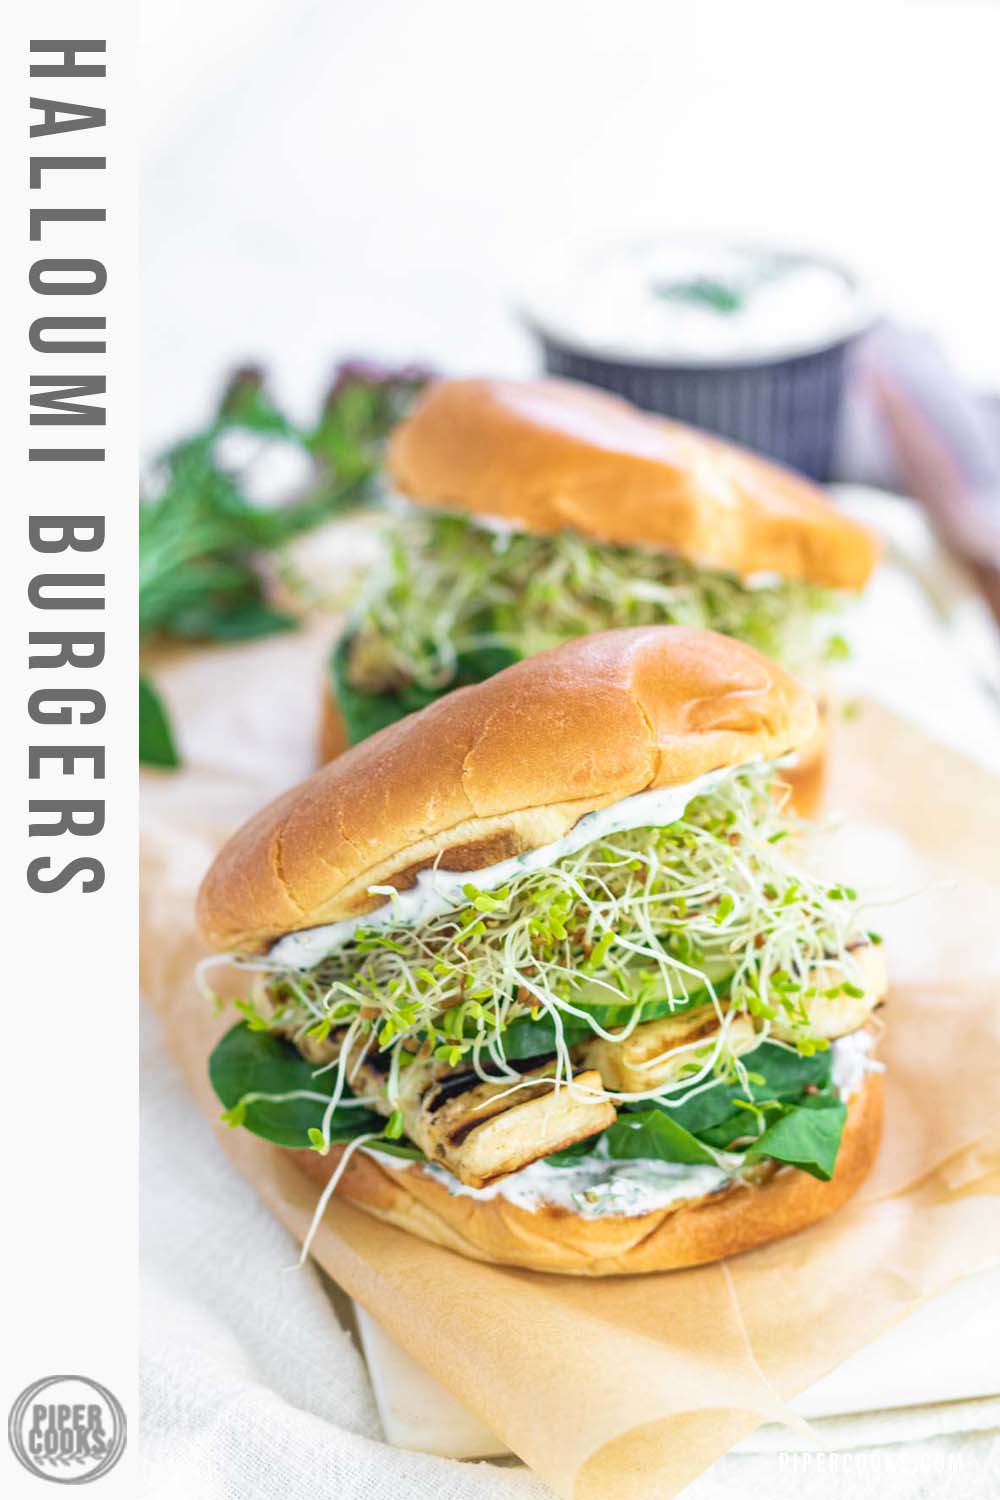 A burger bun stuffed with spinach, grilled halloumi, cucumbers, alfalfa sprouts, and a yogurt spread.,